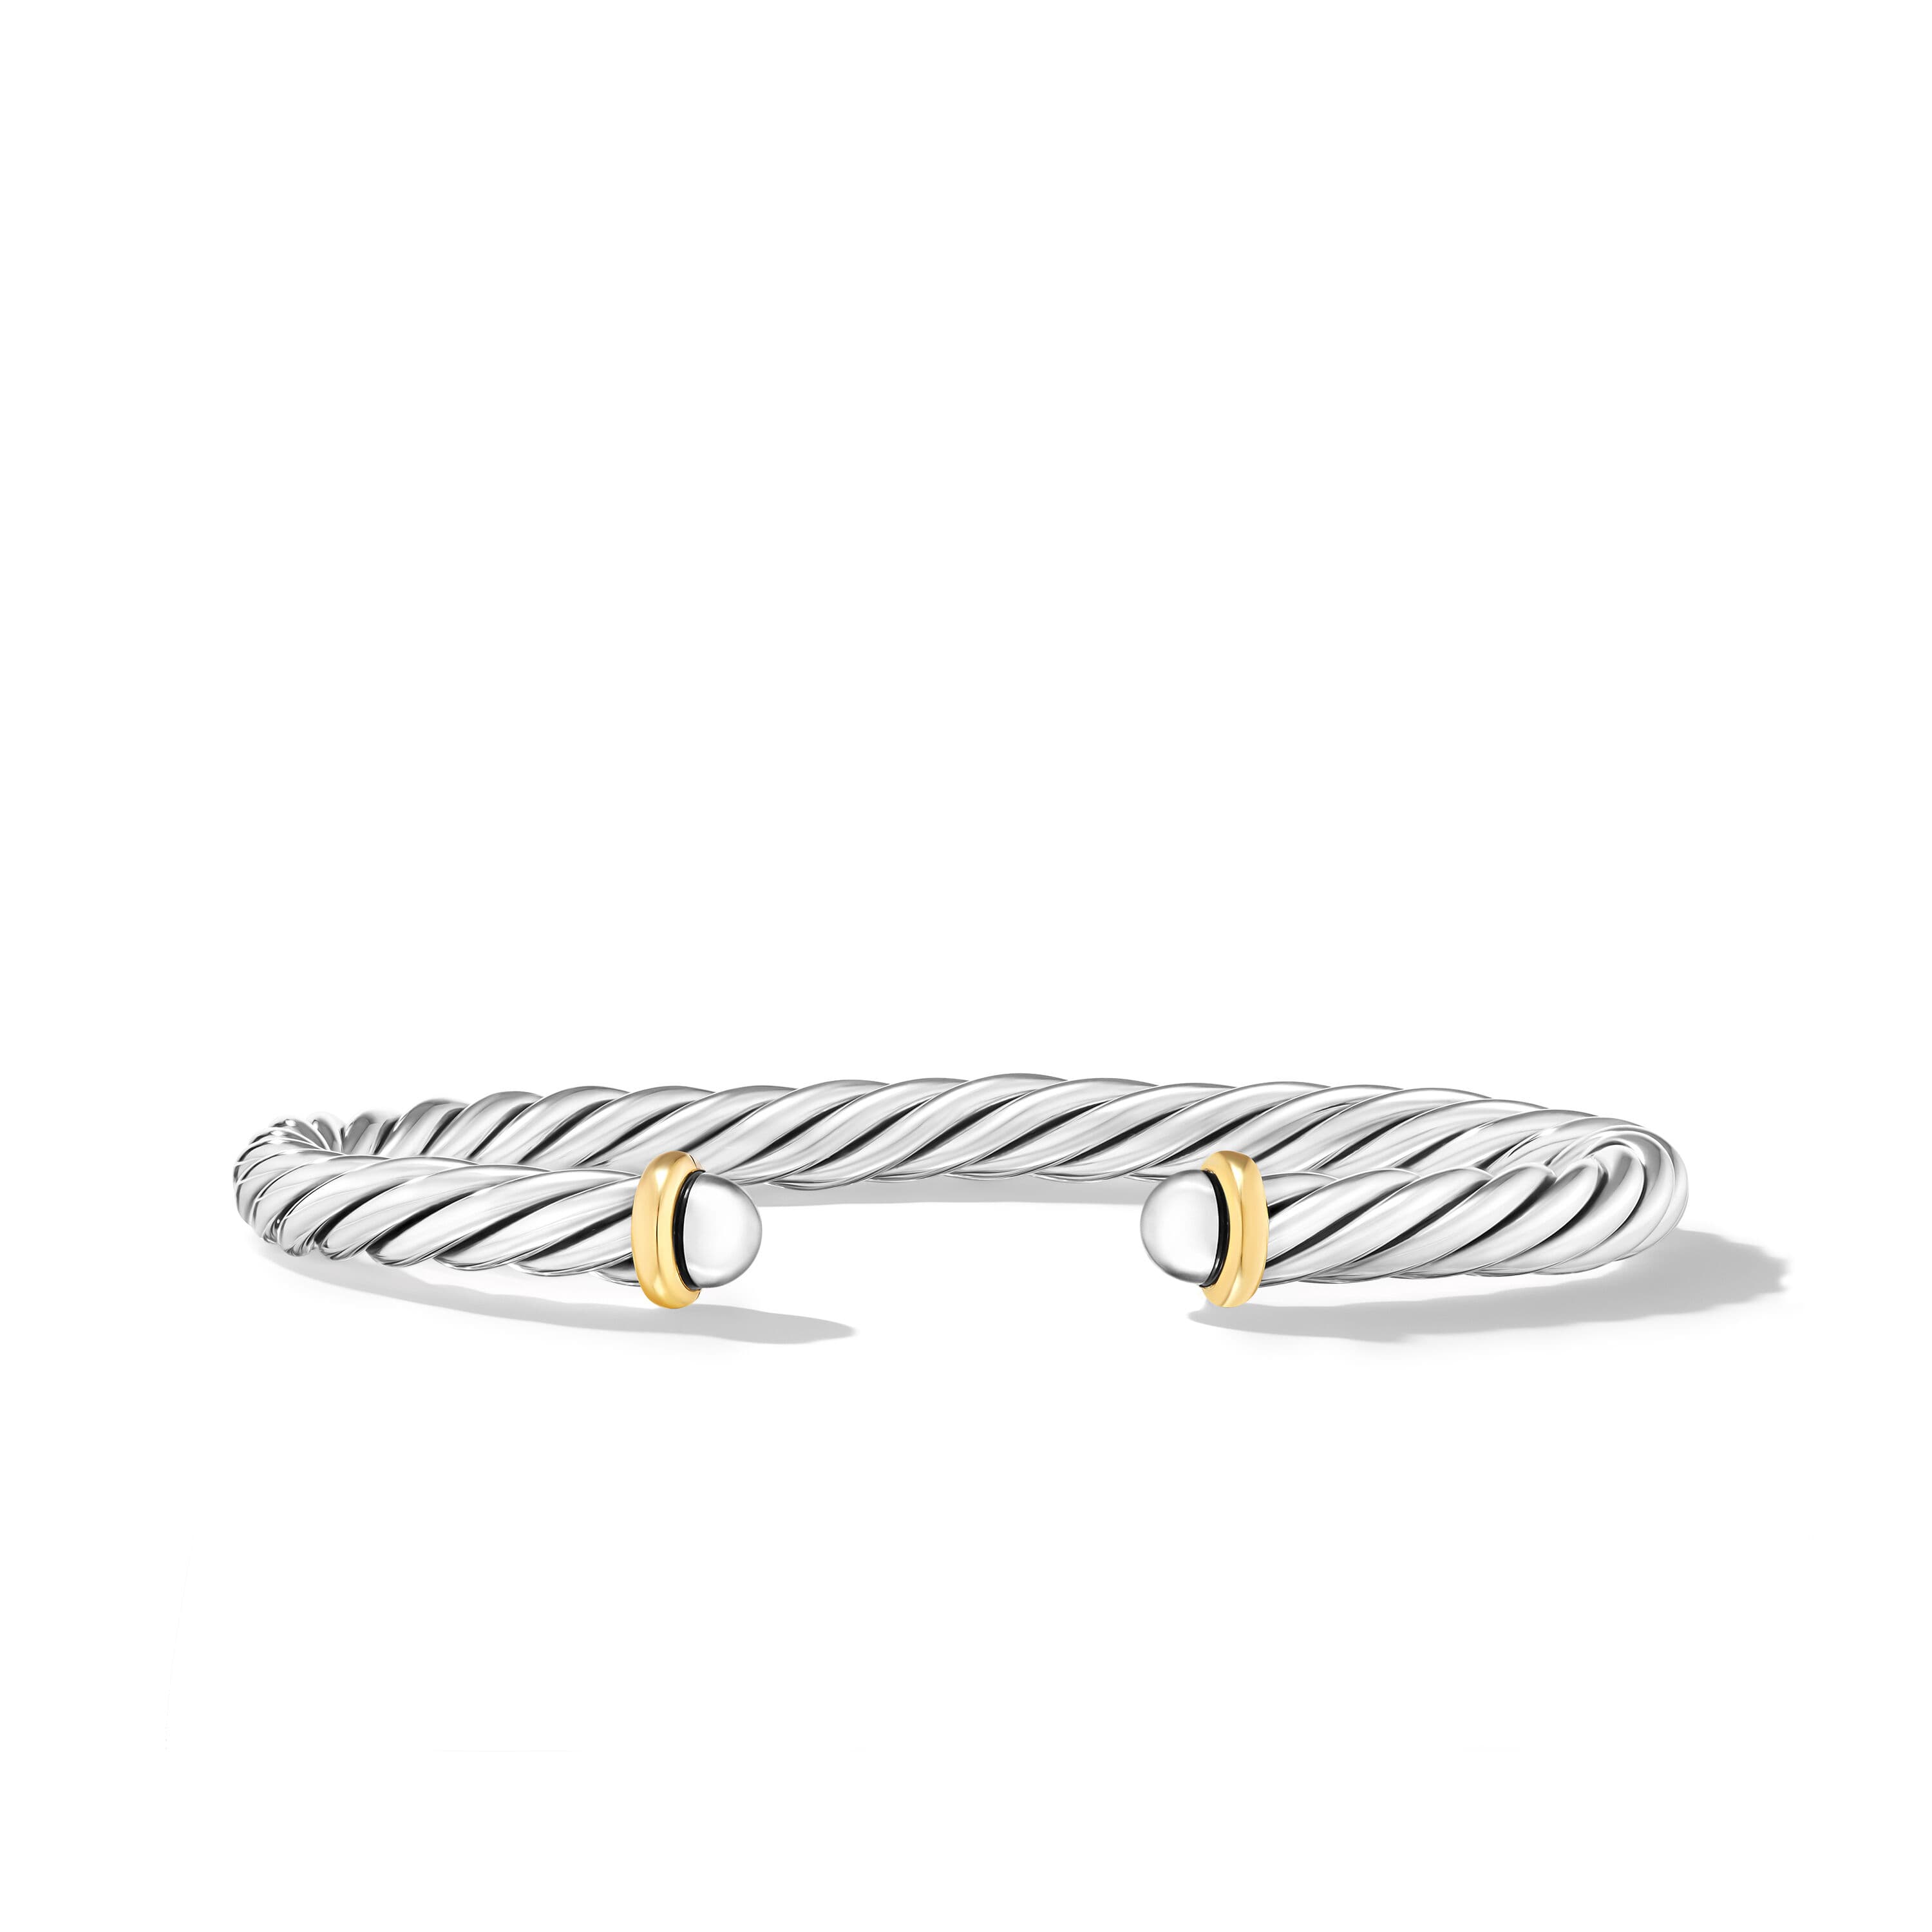 David Yurman 6mm Cable Cuff Bracelet in Sterling Silver with 14K Yellow Gold, Large